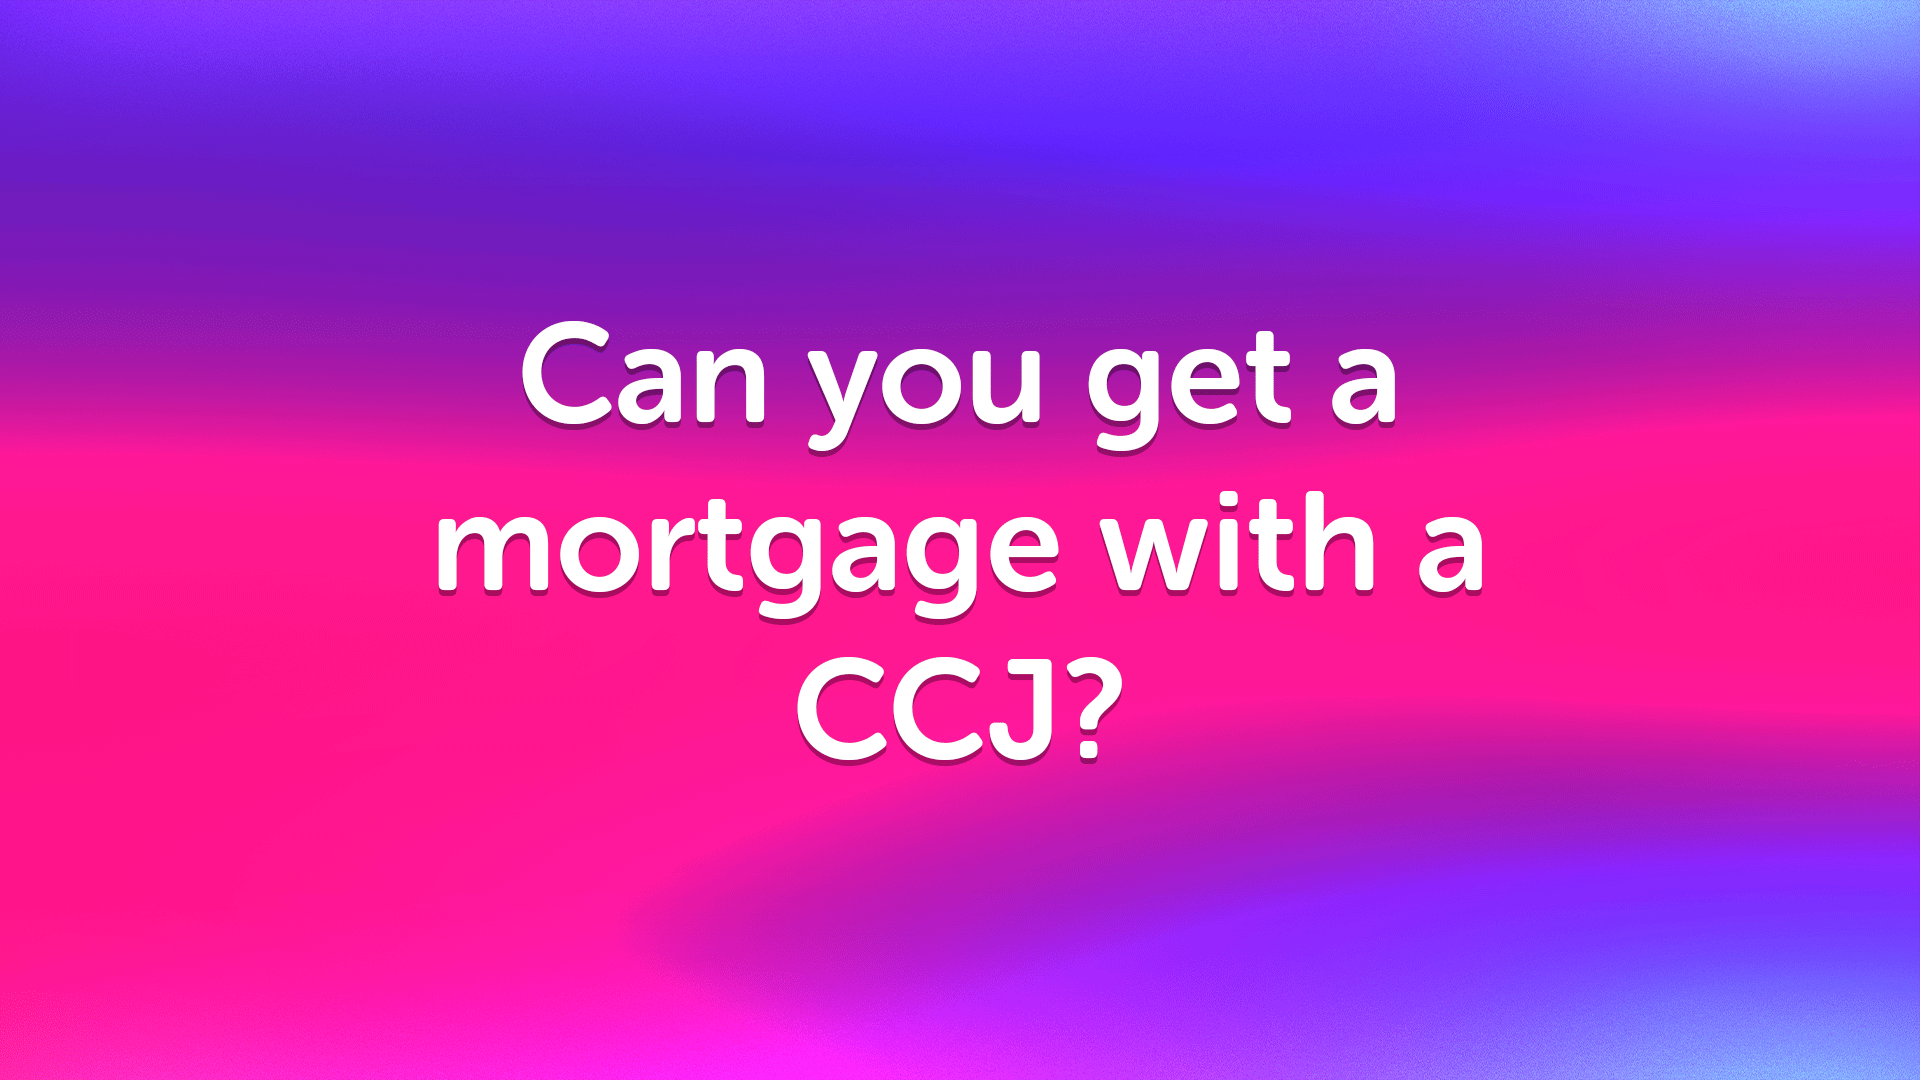 Can You Get a Mortgage in Hull With a CCJ?